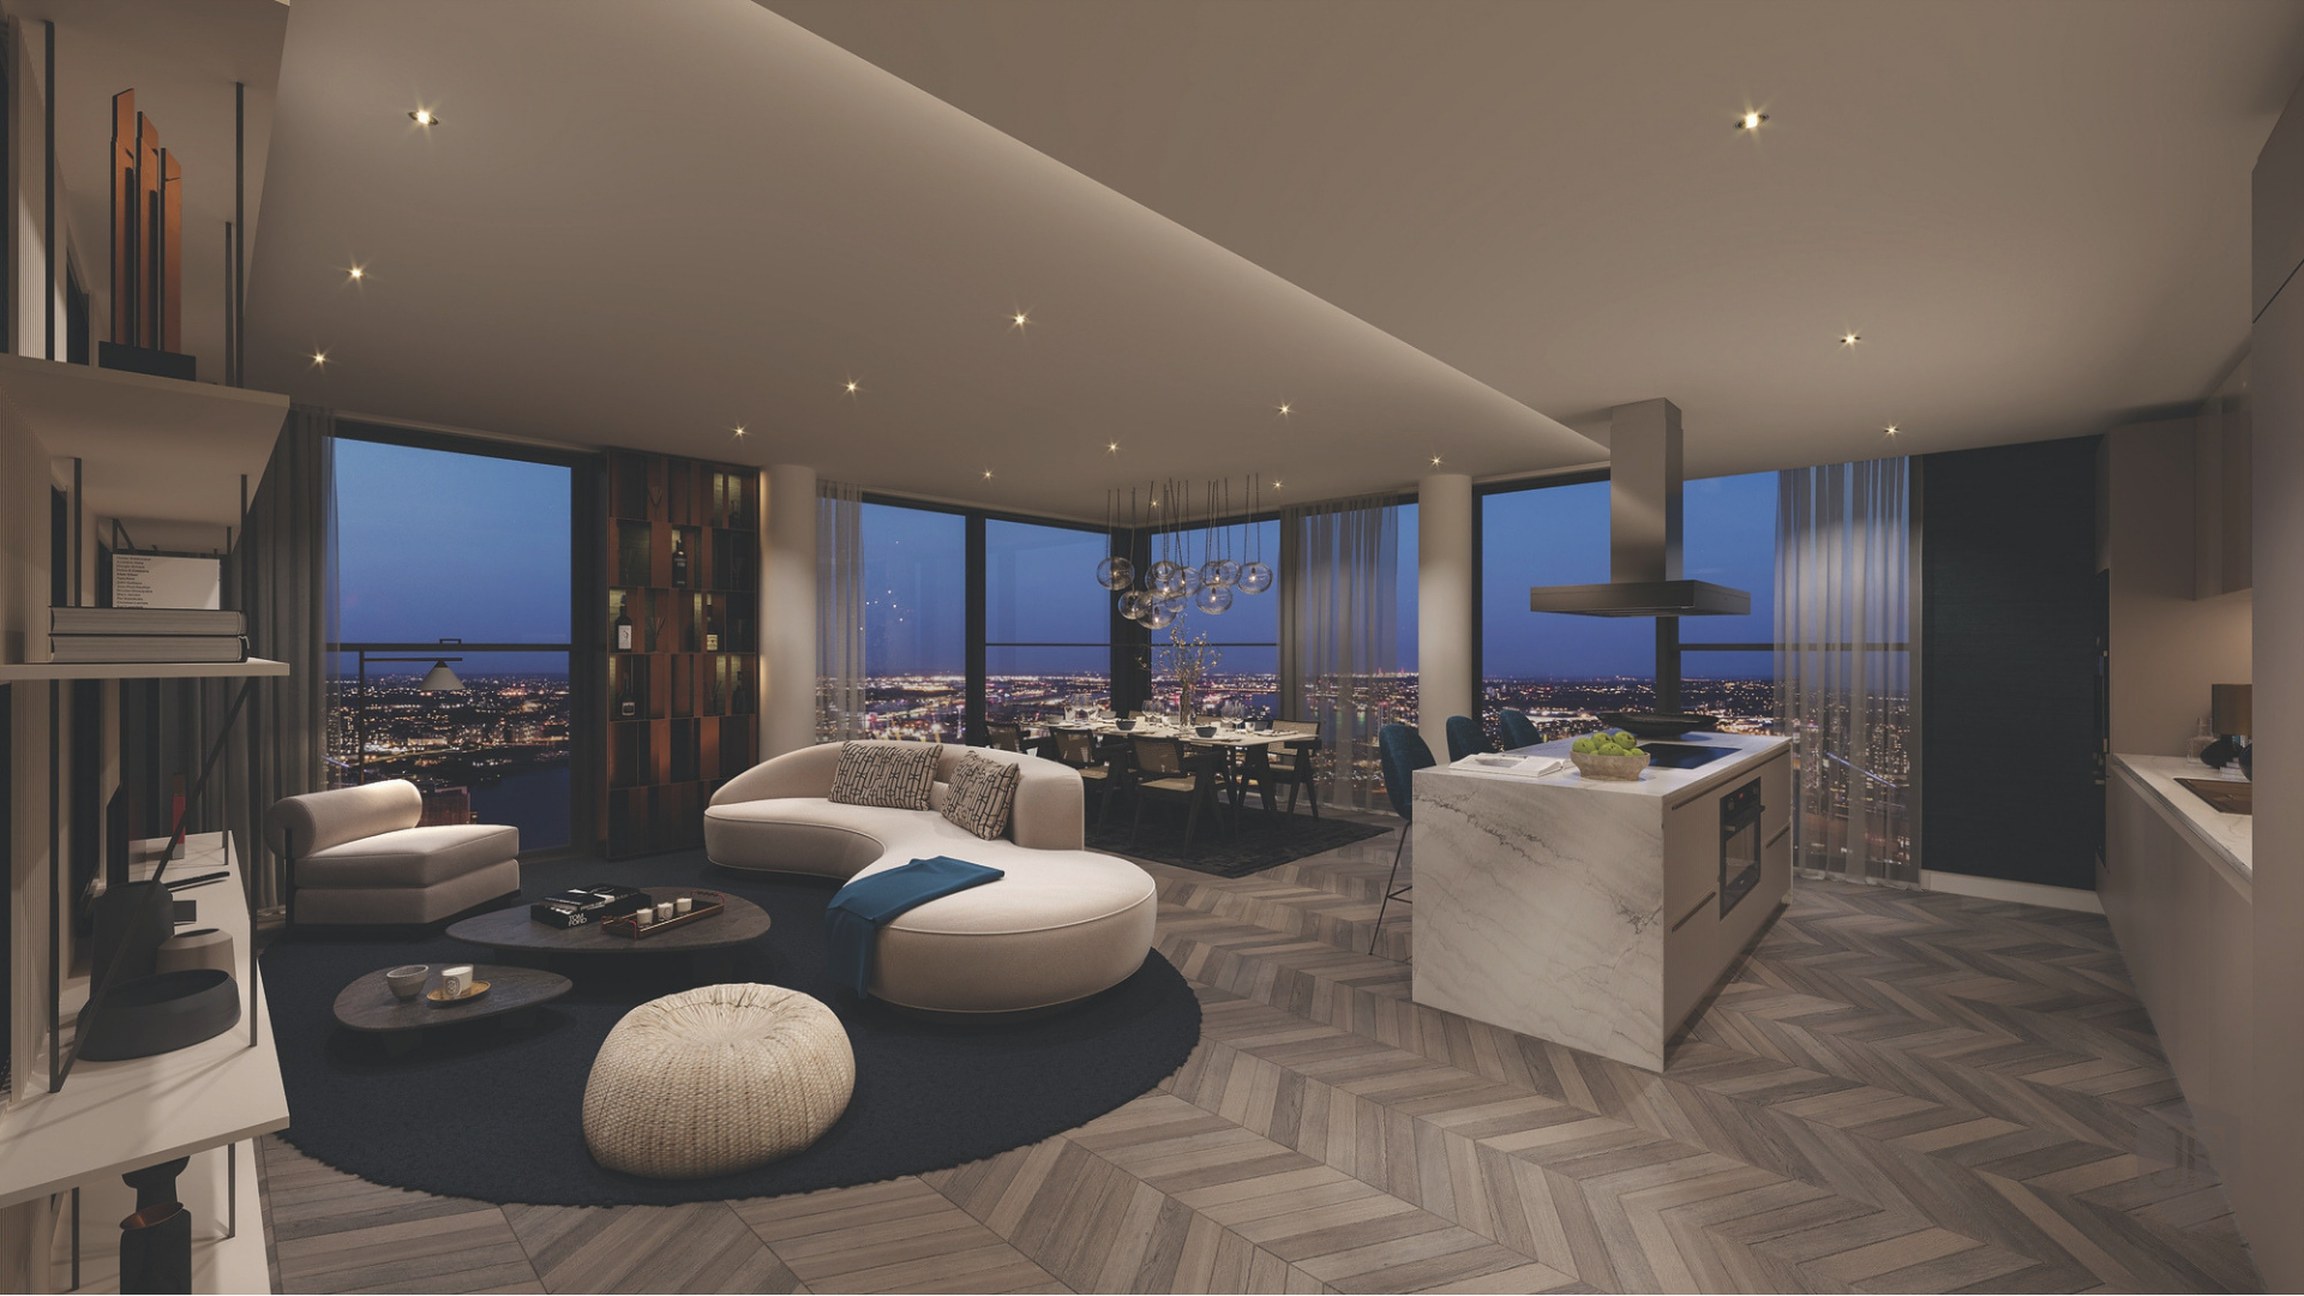 Exclusivity and luxury manifested in penthouses